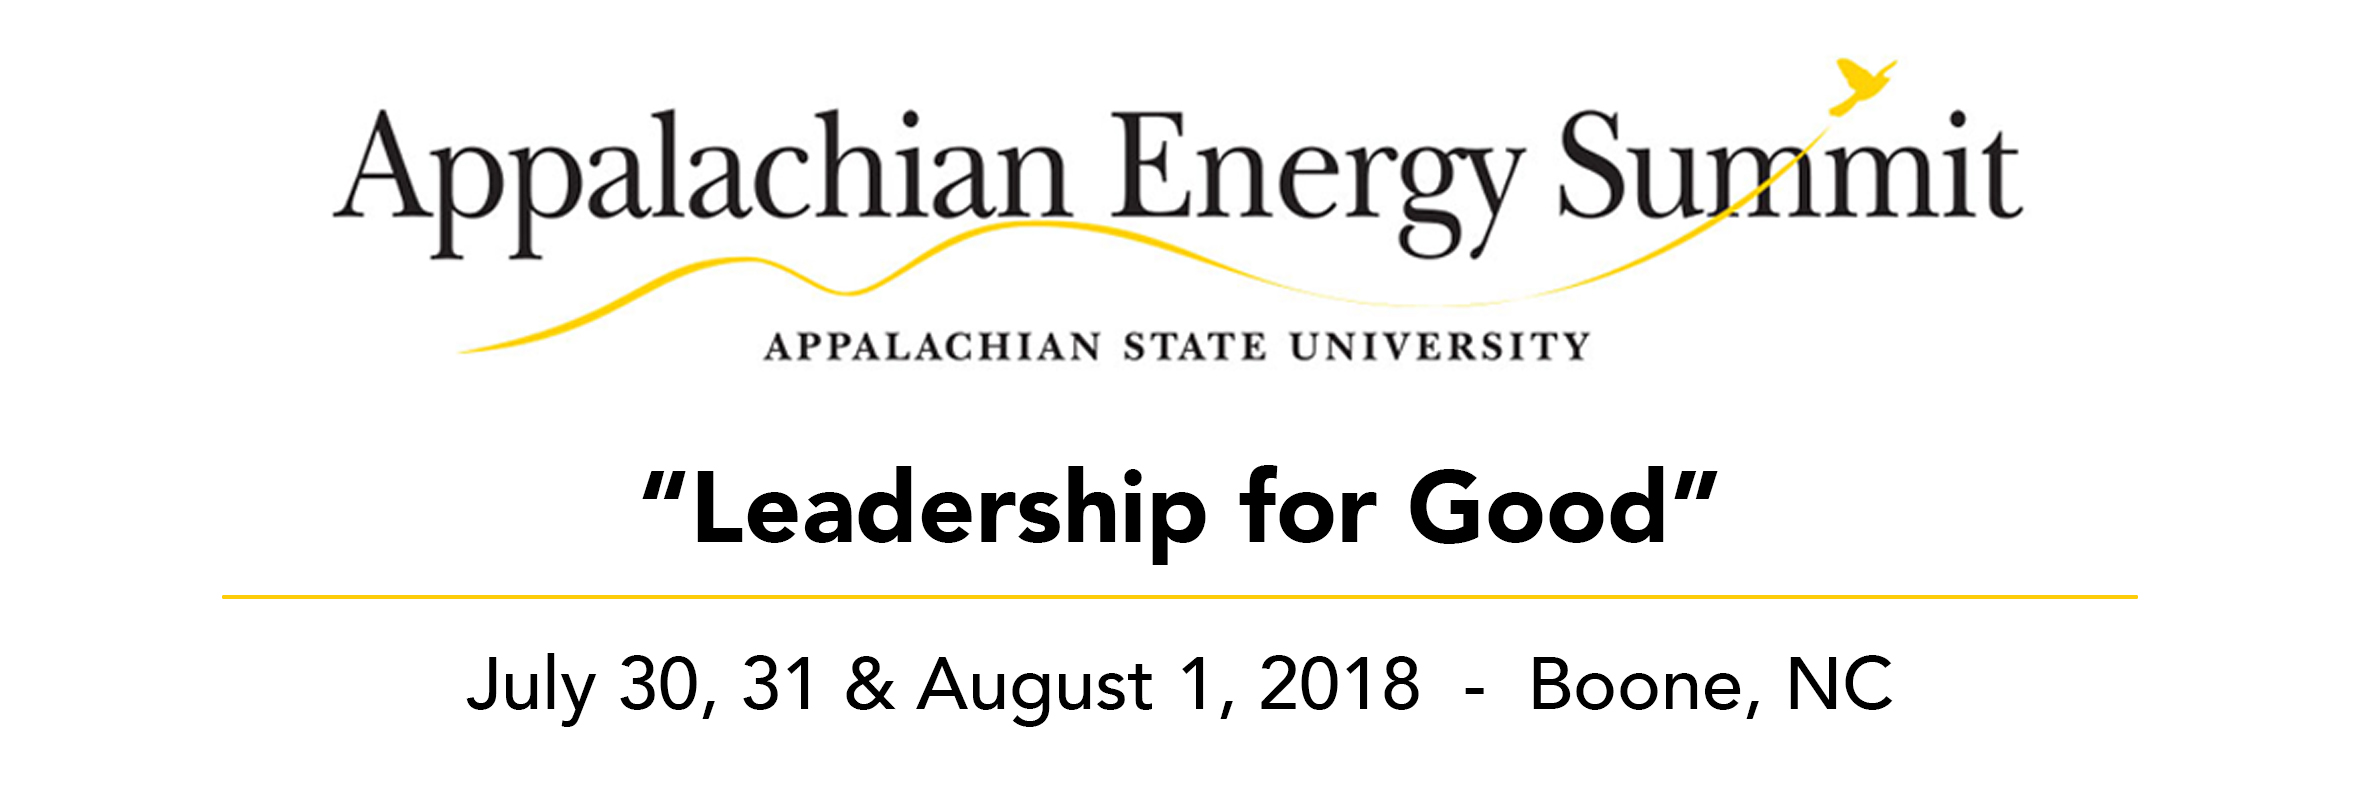 Appalachian Energy Summit July 30, 31 and August 1, 2018